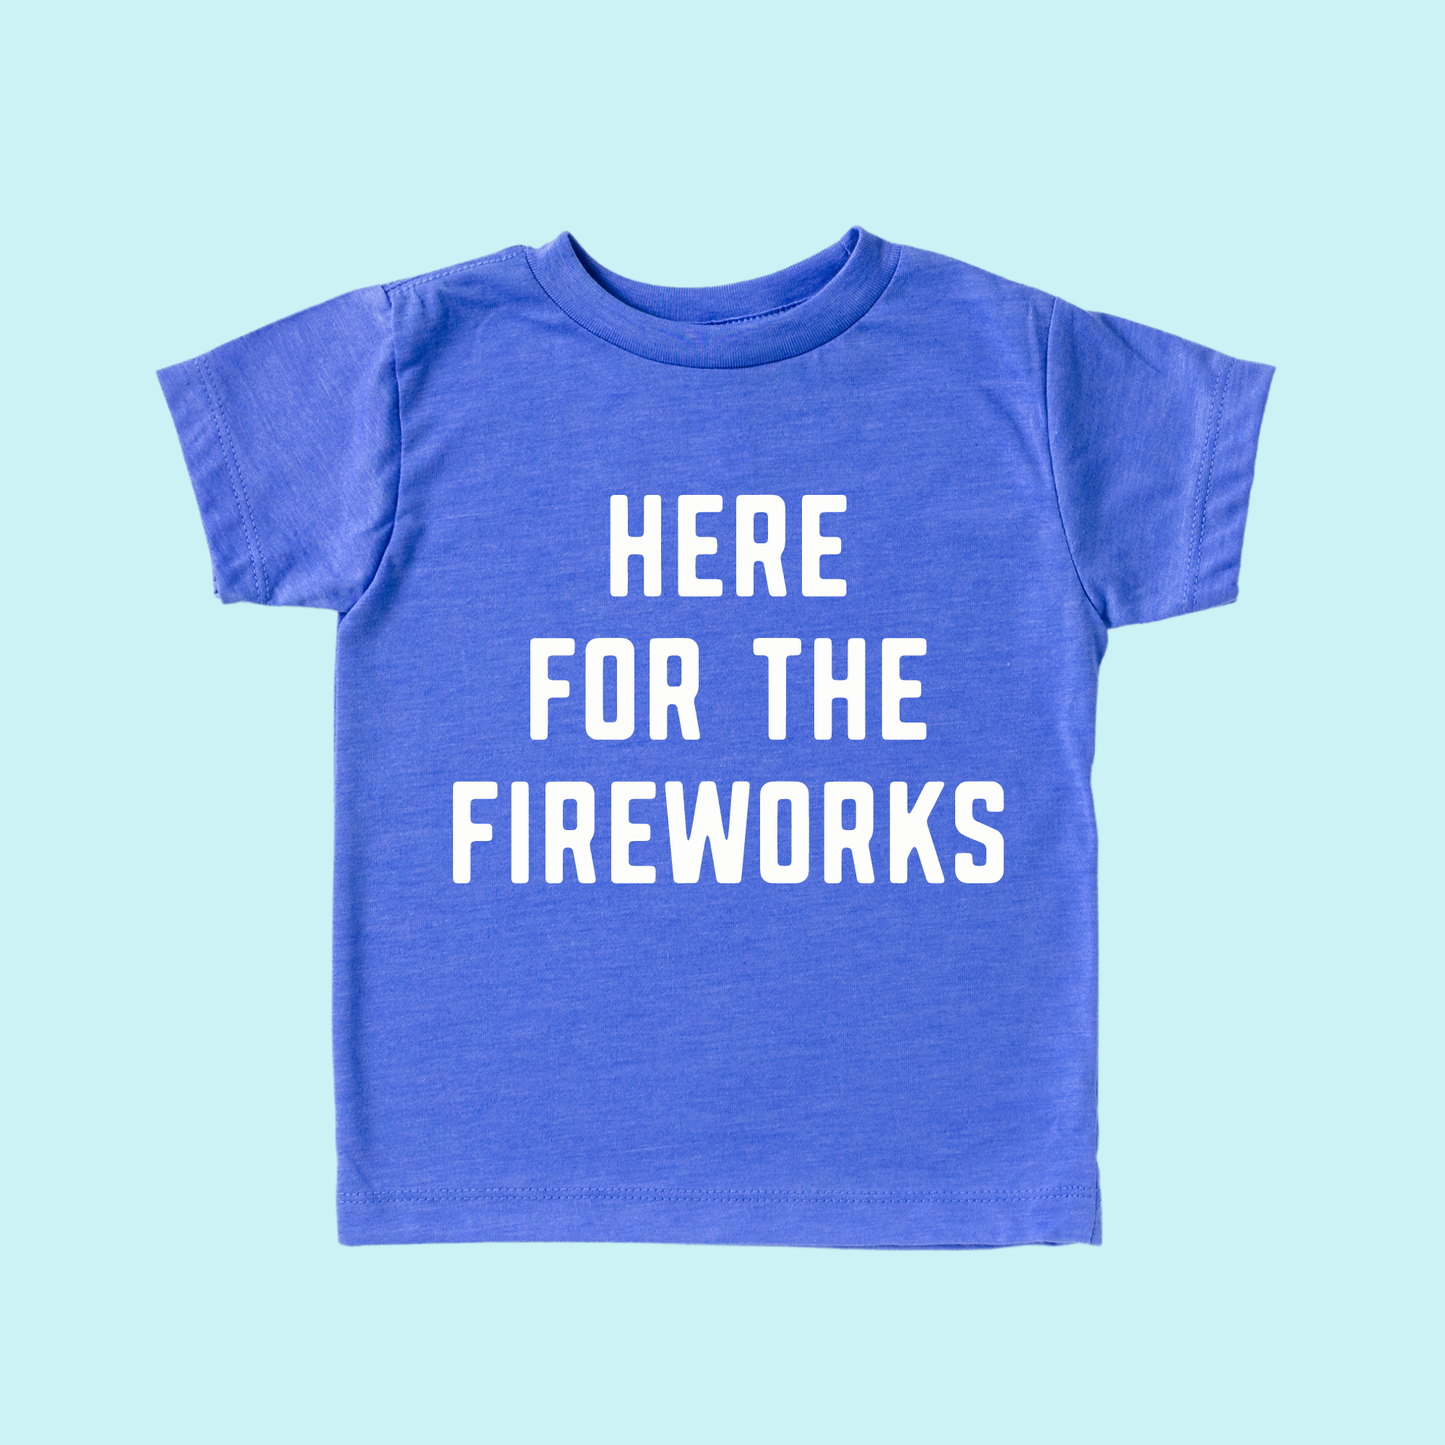 Here for the fireworks Tee